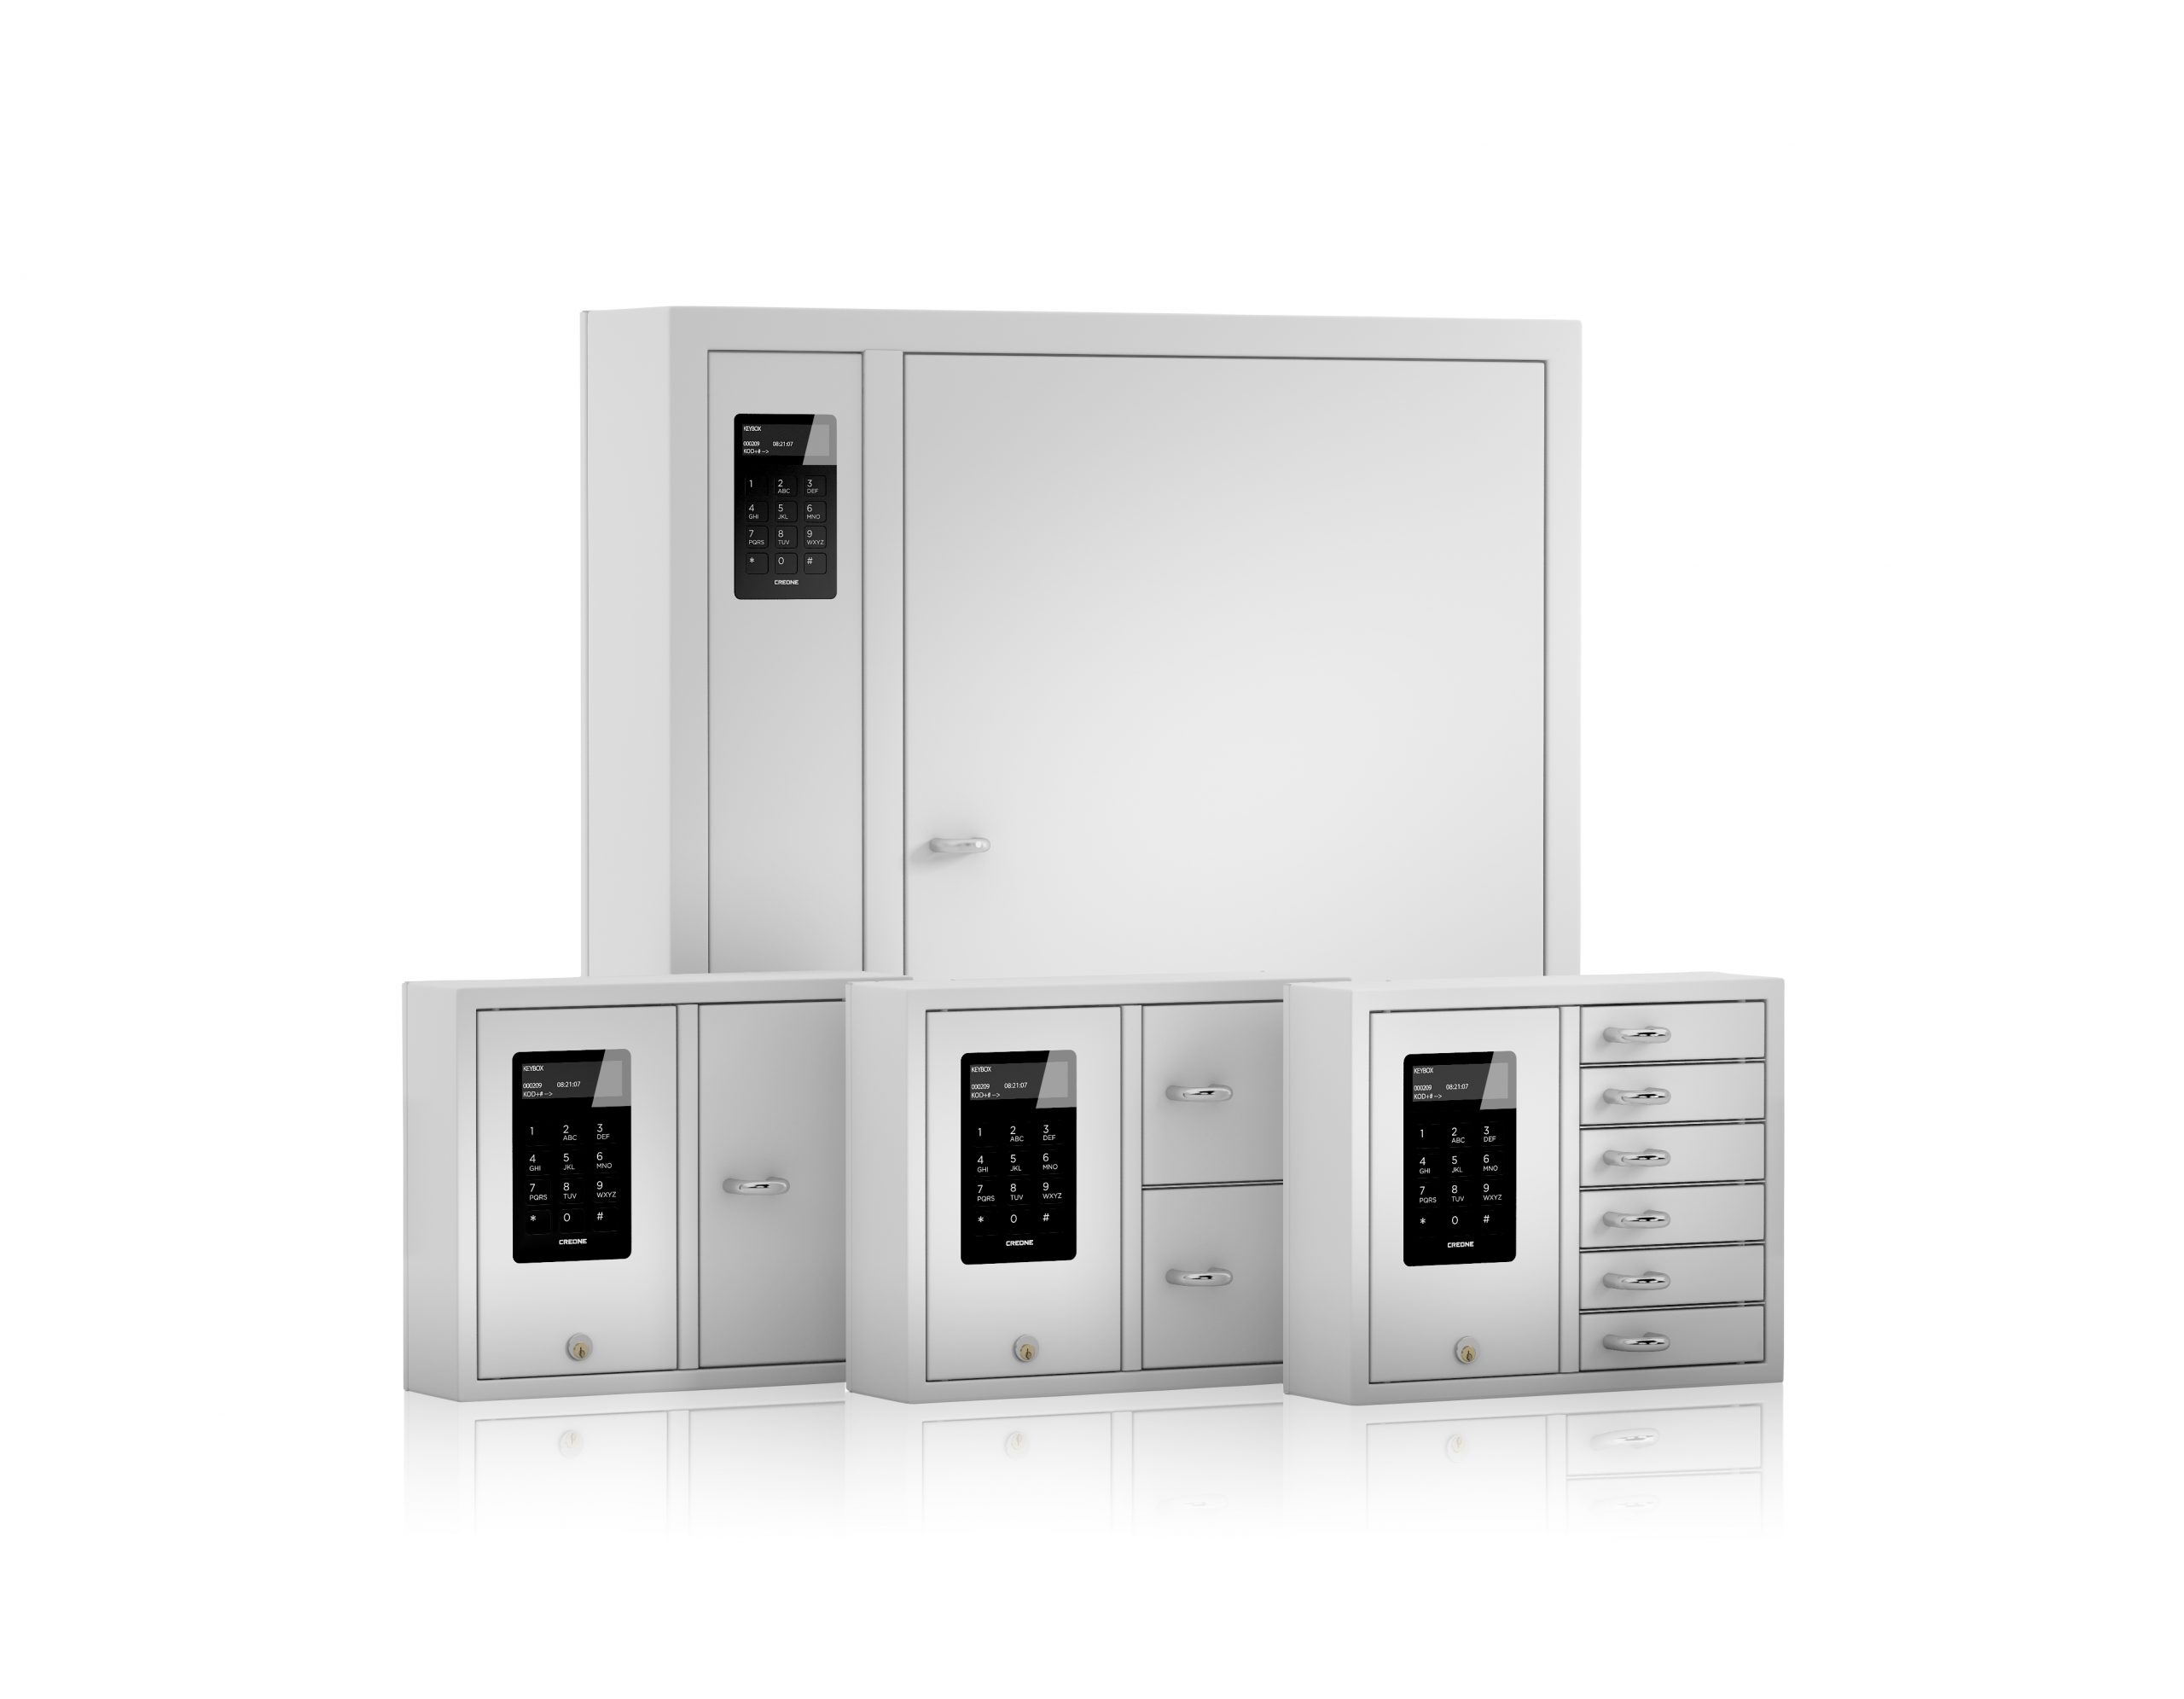 Smaller group image for KeyBox System series key cabinets